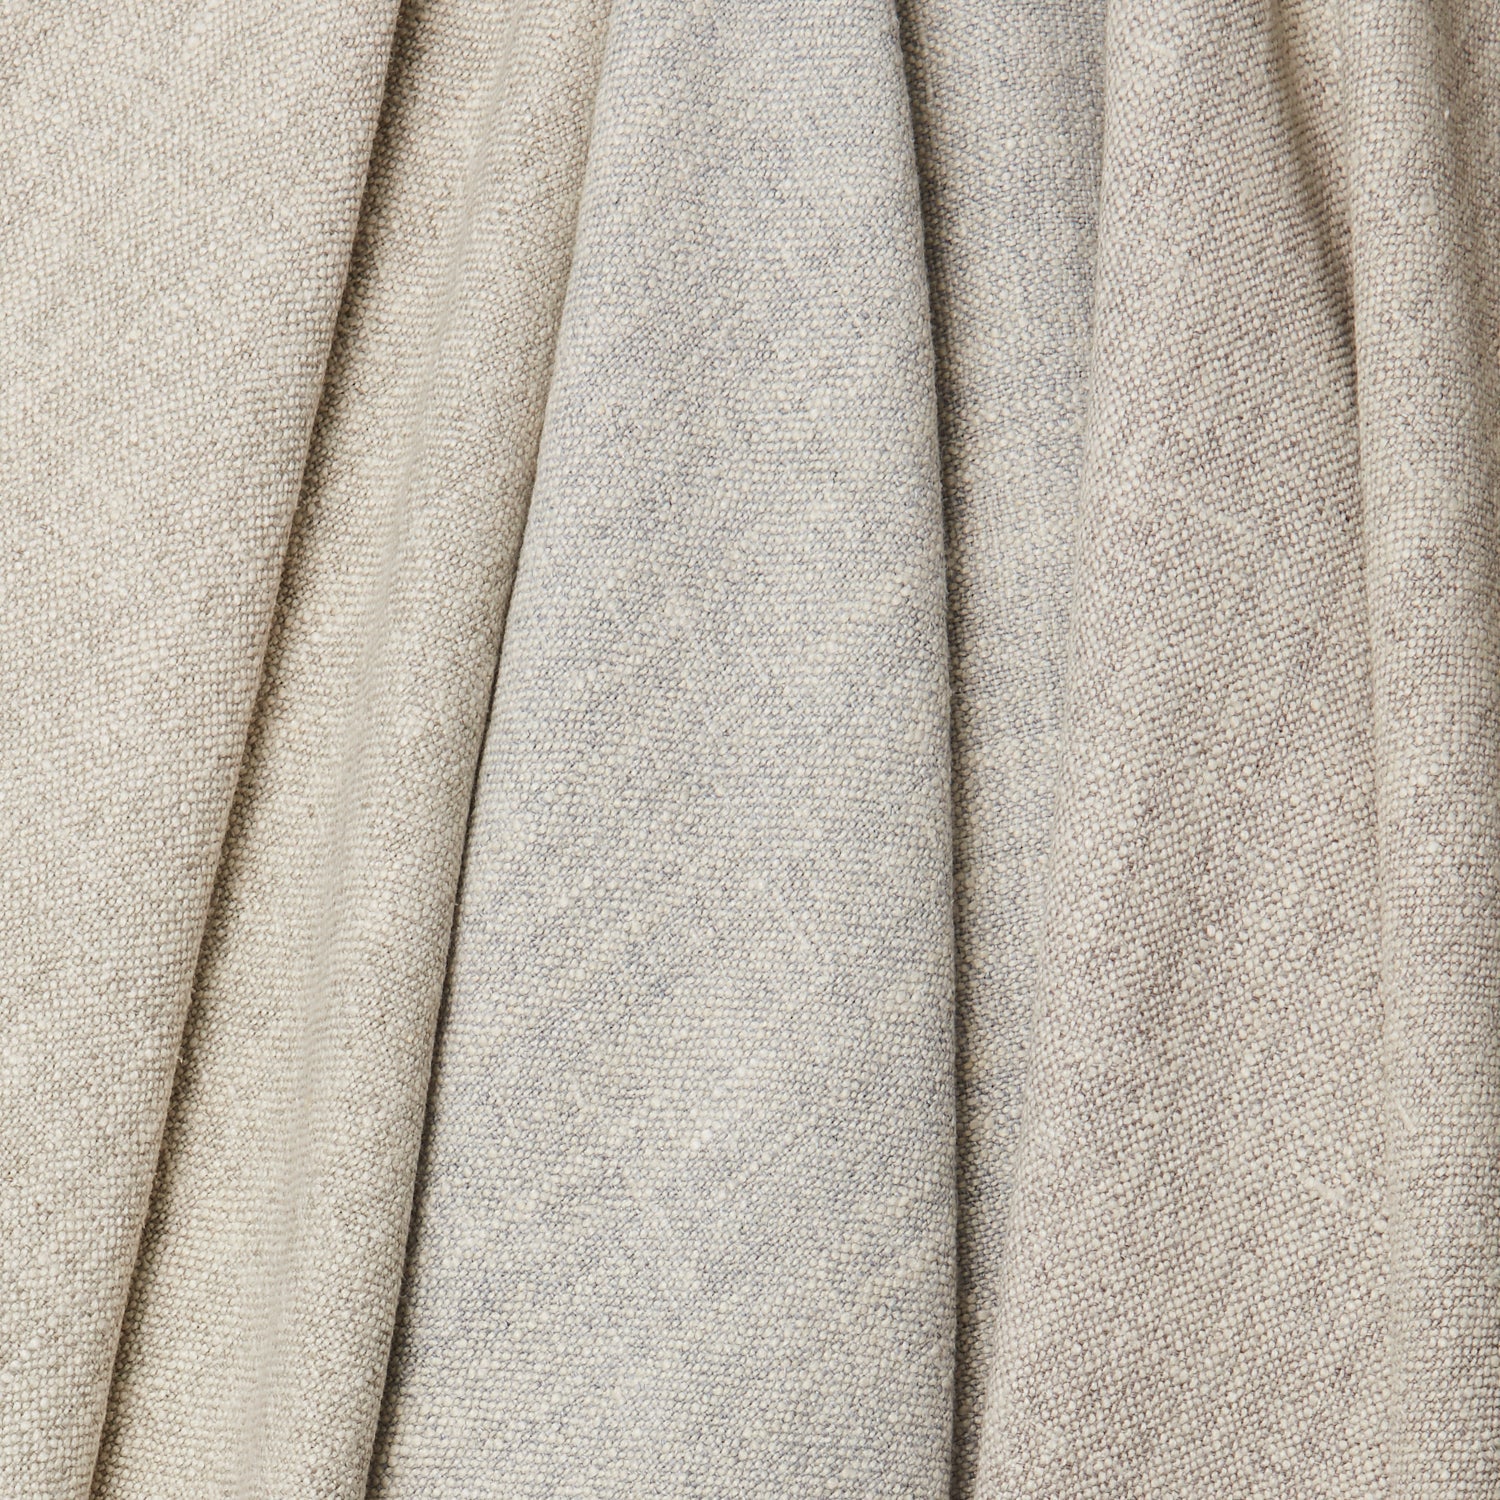 All three colors of the Normandy Fabric shown draped to show the subtle color differences